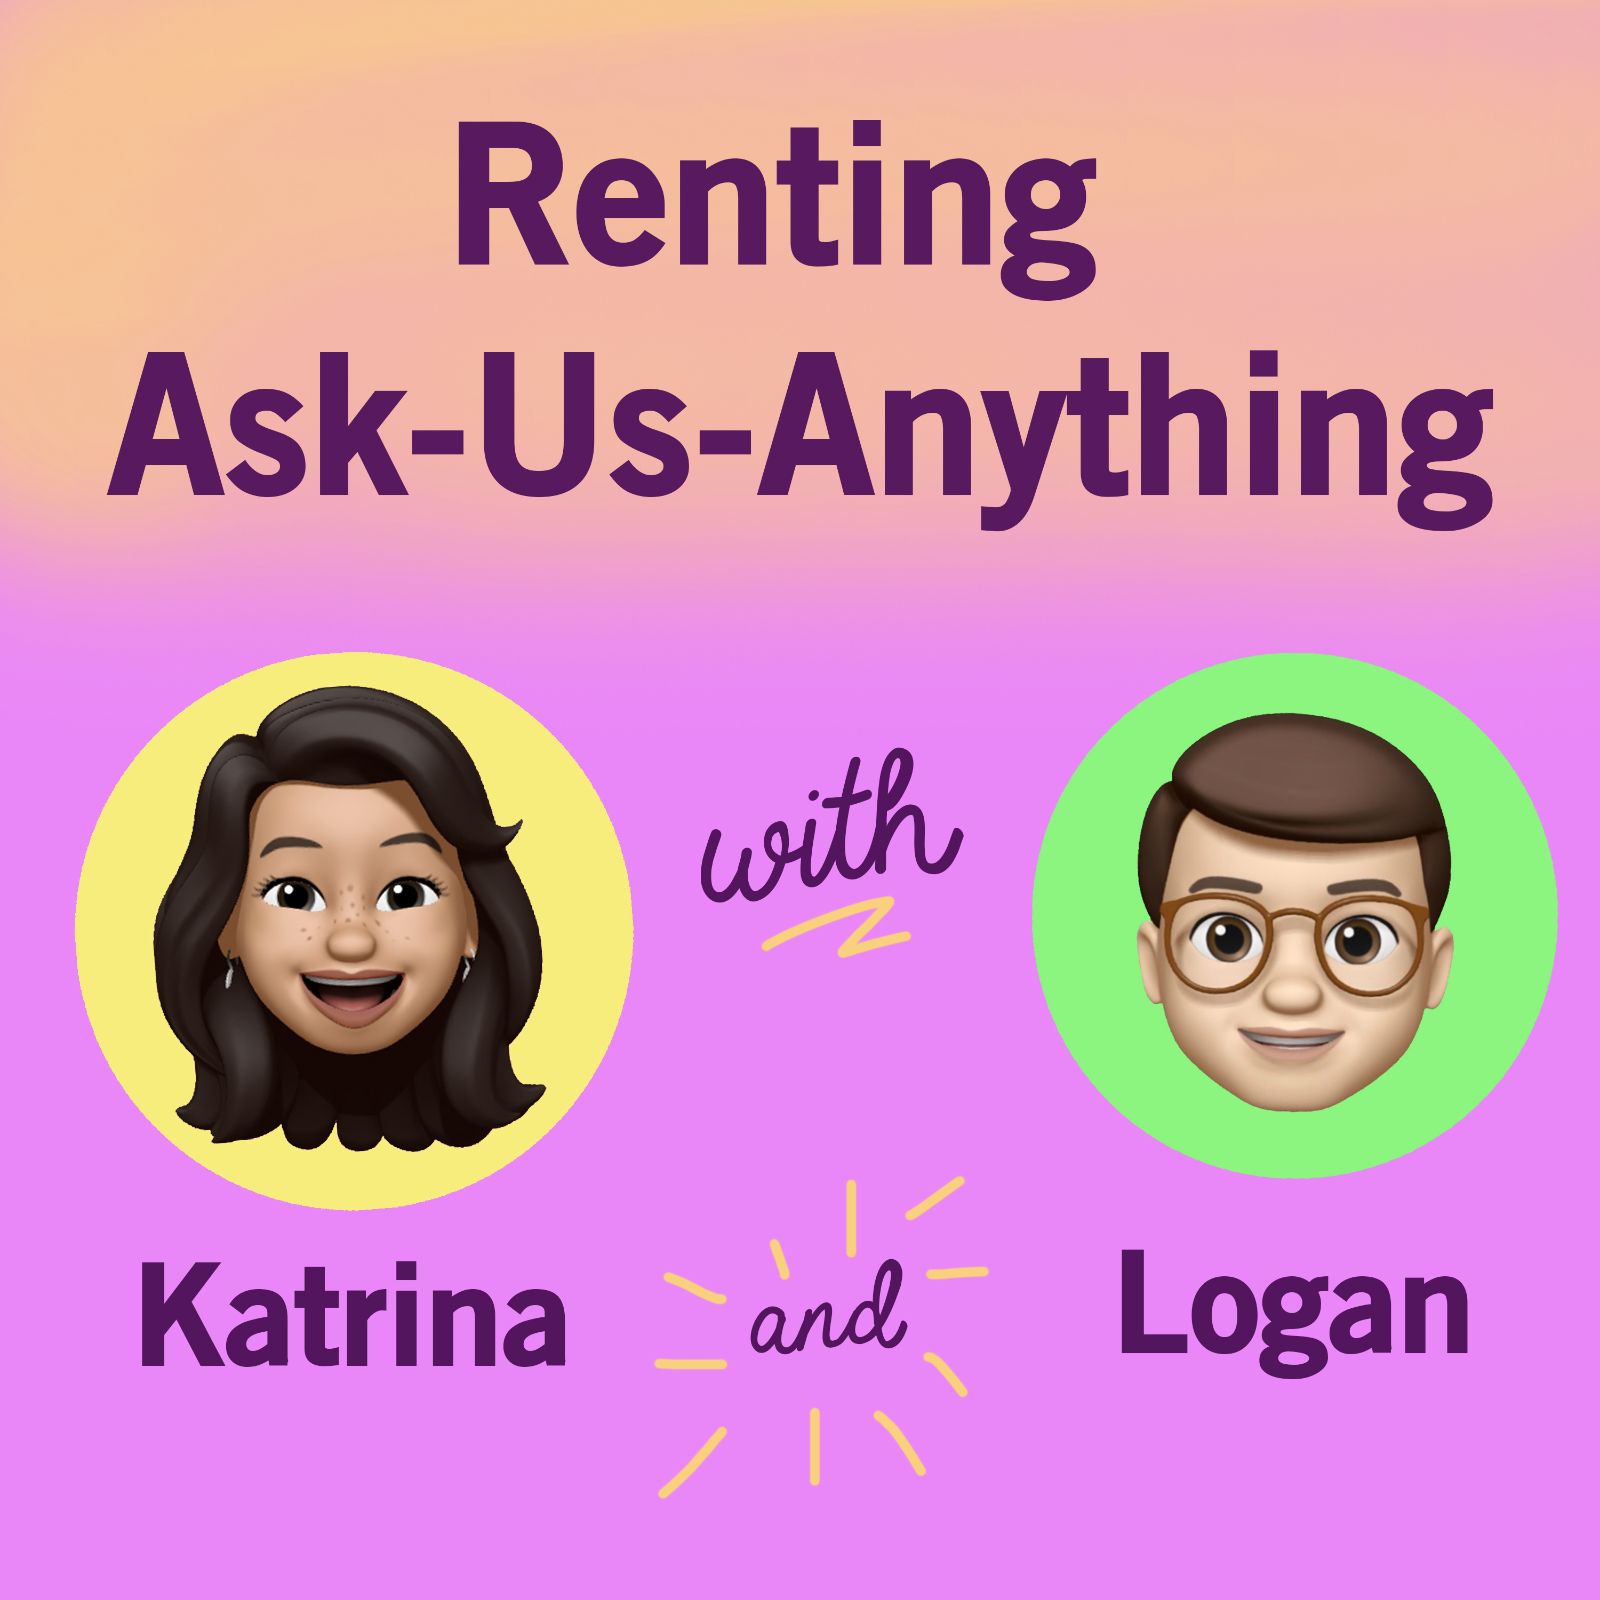 Image reads Renting Ask Us Anything and features two emojis representing Katrina, a brown woman, and Logan, a white man with glasses